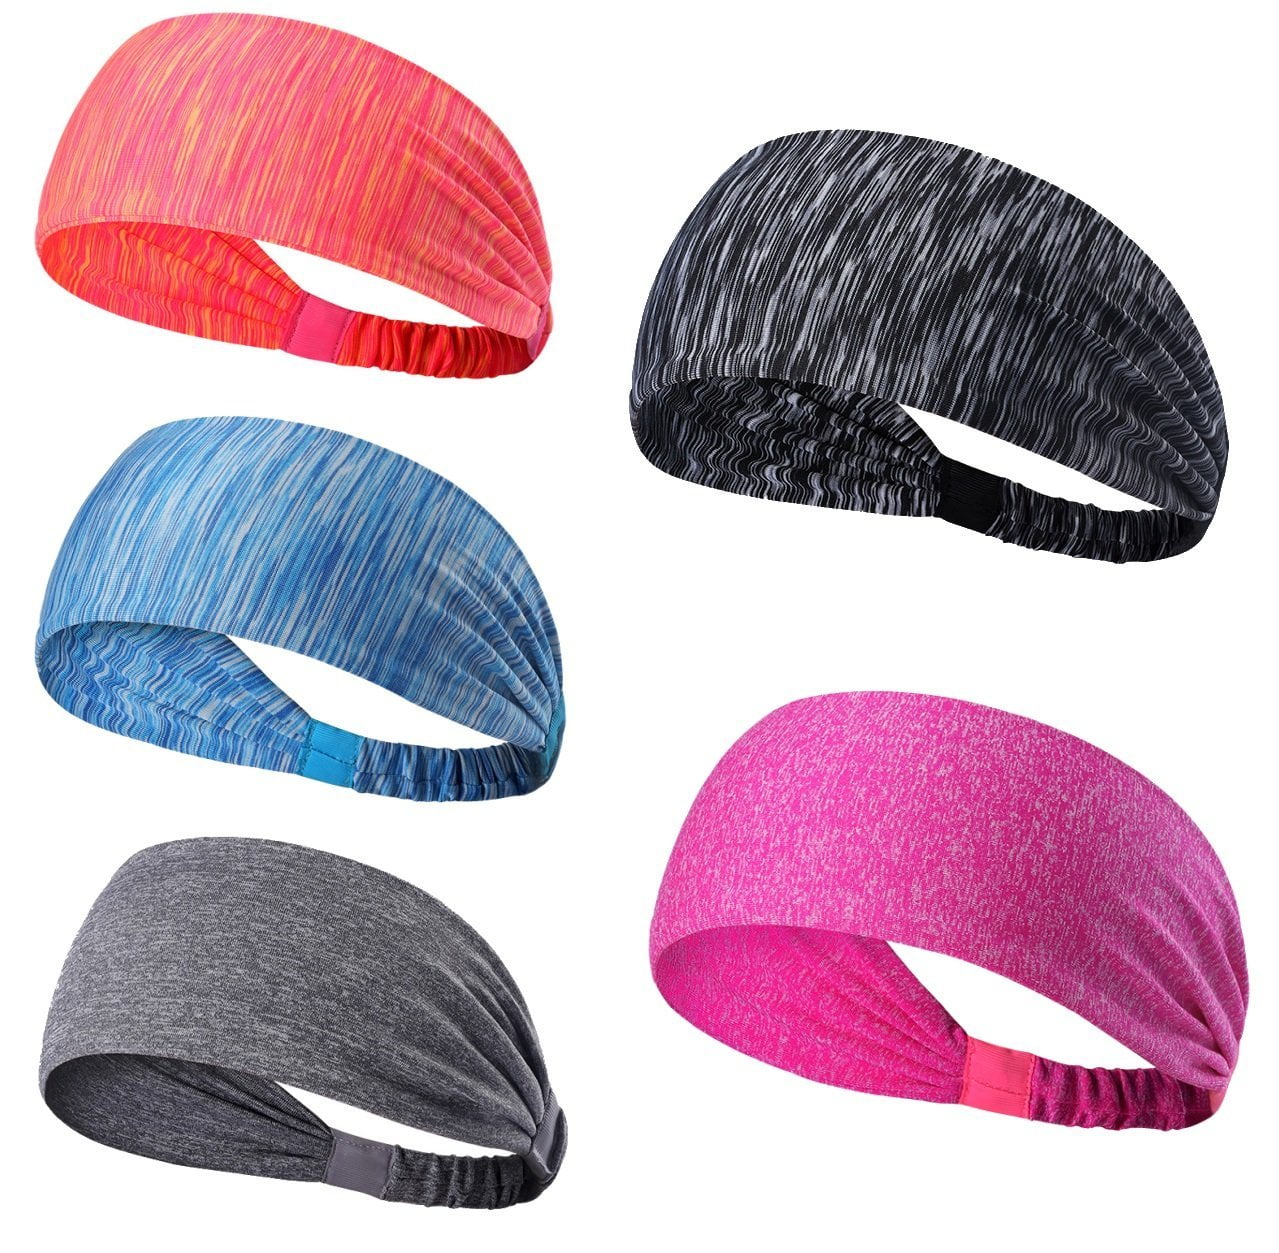 CCHOME Headbands 3 Pack for Men & Women，Hair Band Sweatband for Fitness Running Yoga Tennis Athletic Head Wrap Bands 